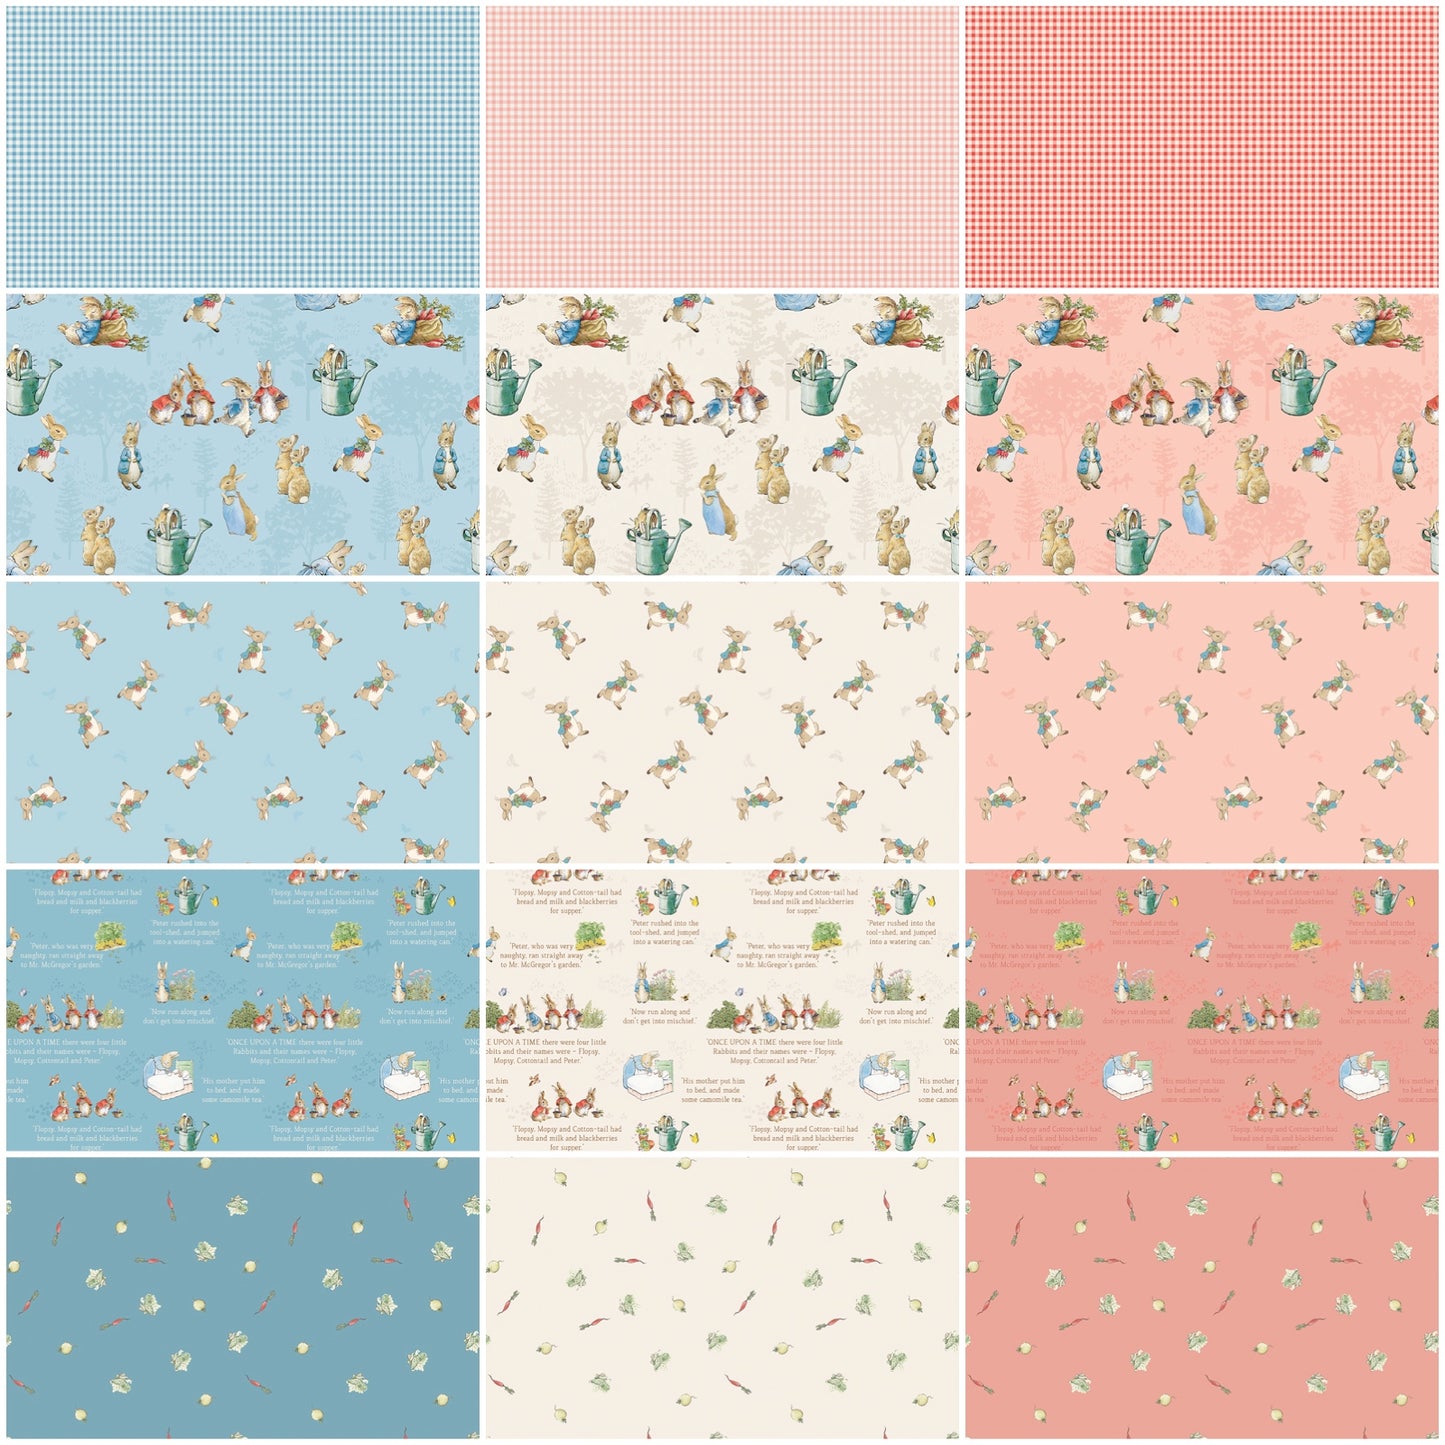 PREORDER ITEM - EXPECTED MAY 2024: Licensed The Tale Of Peter Rabbit Fat Quarter Bundle of 15 Prints   FQ-14700-15 Bundle